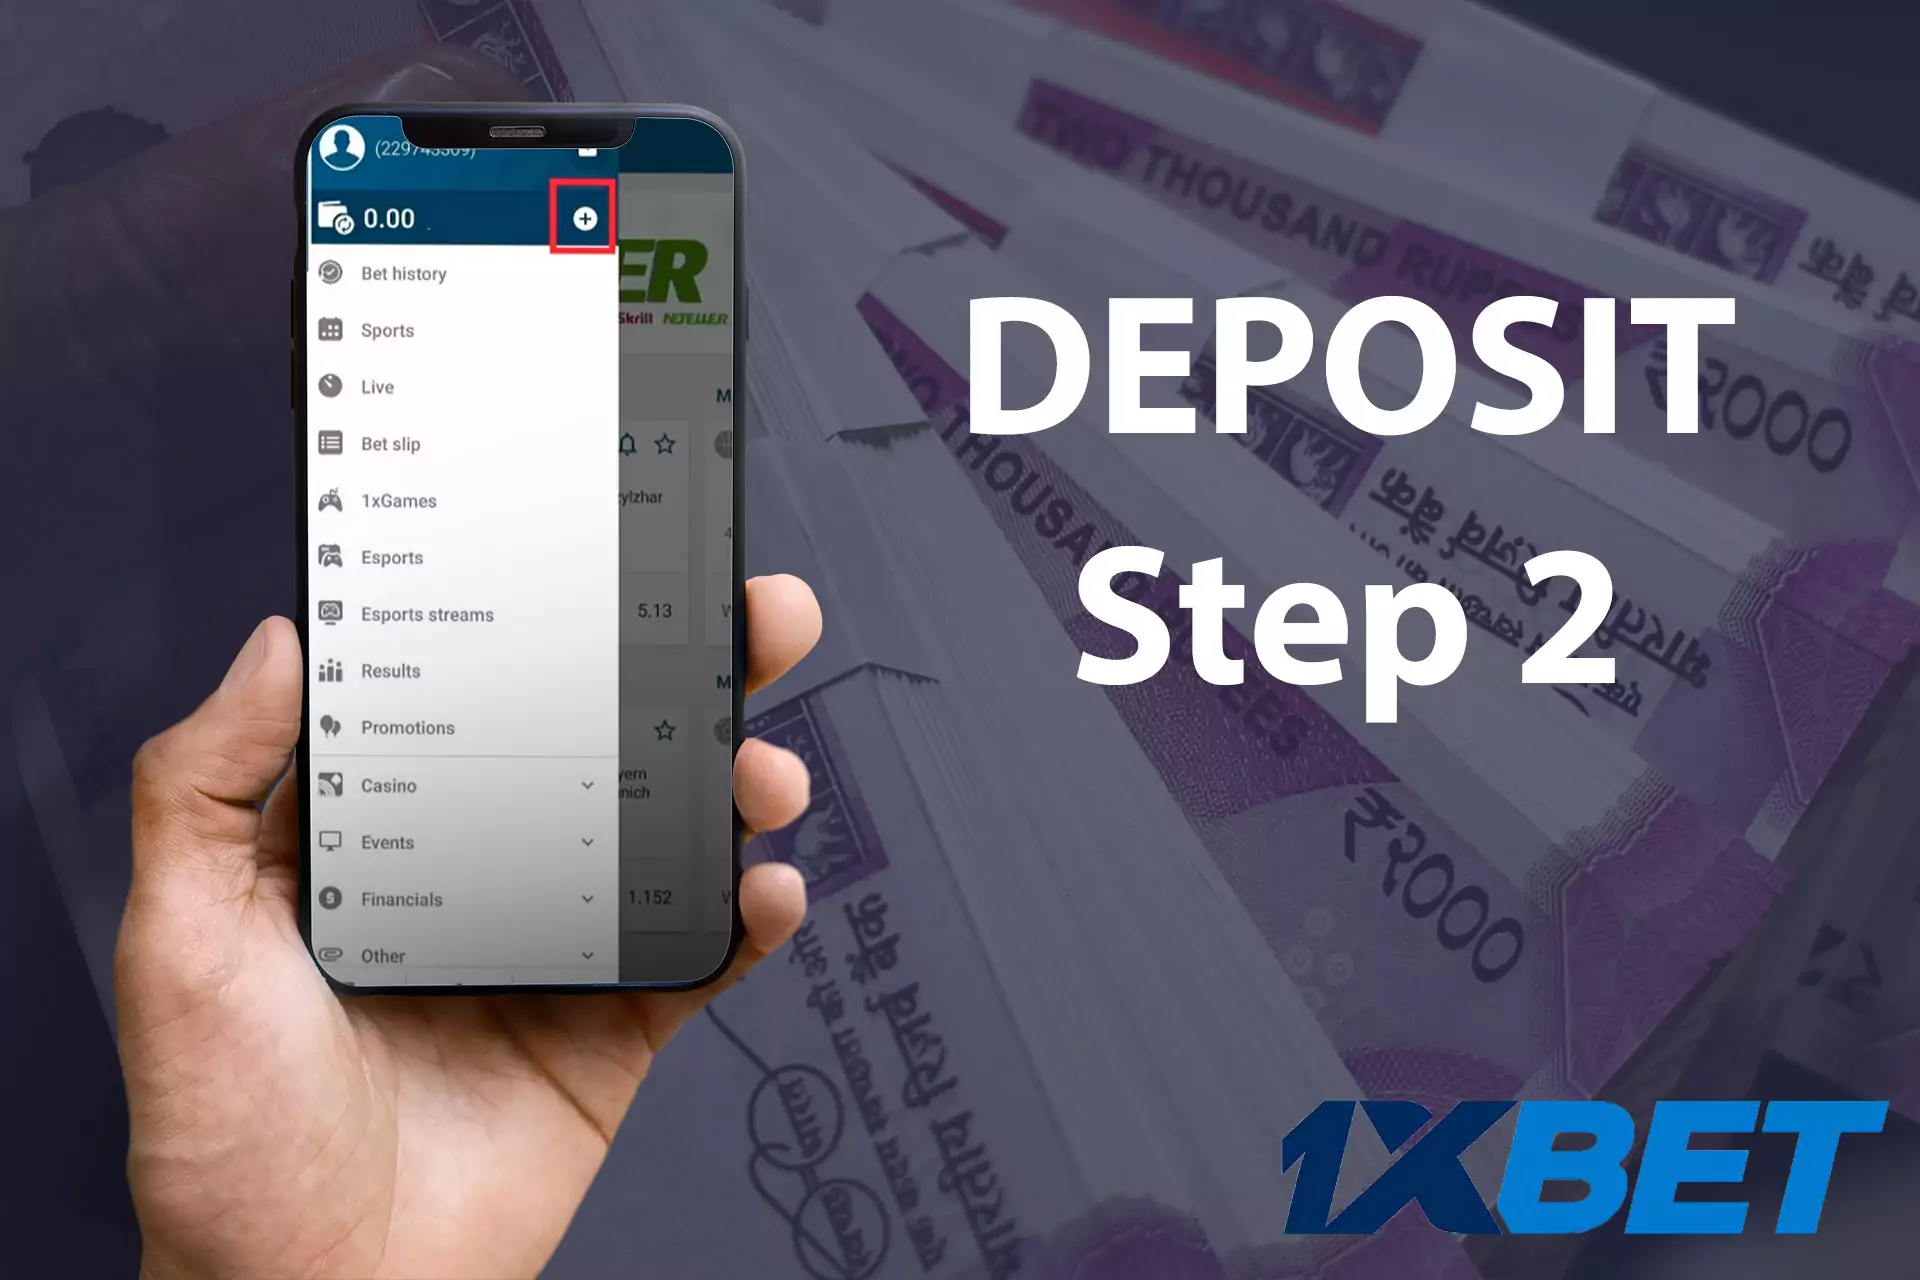 Go to the deposit page of the official site.